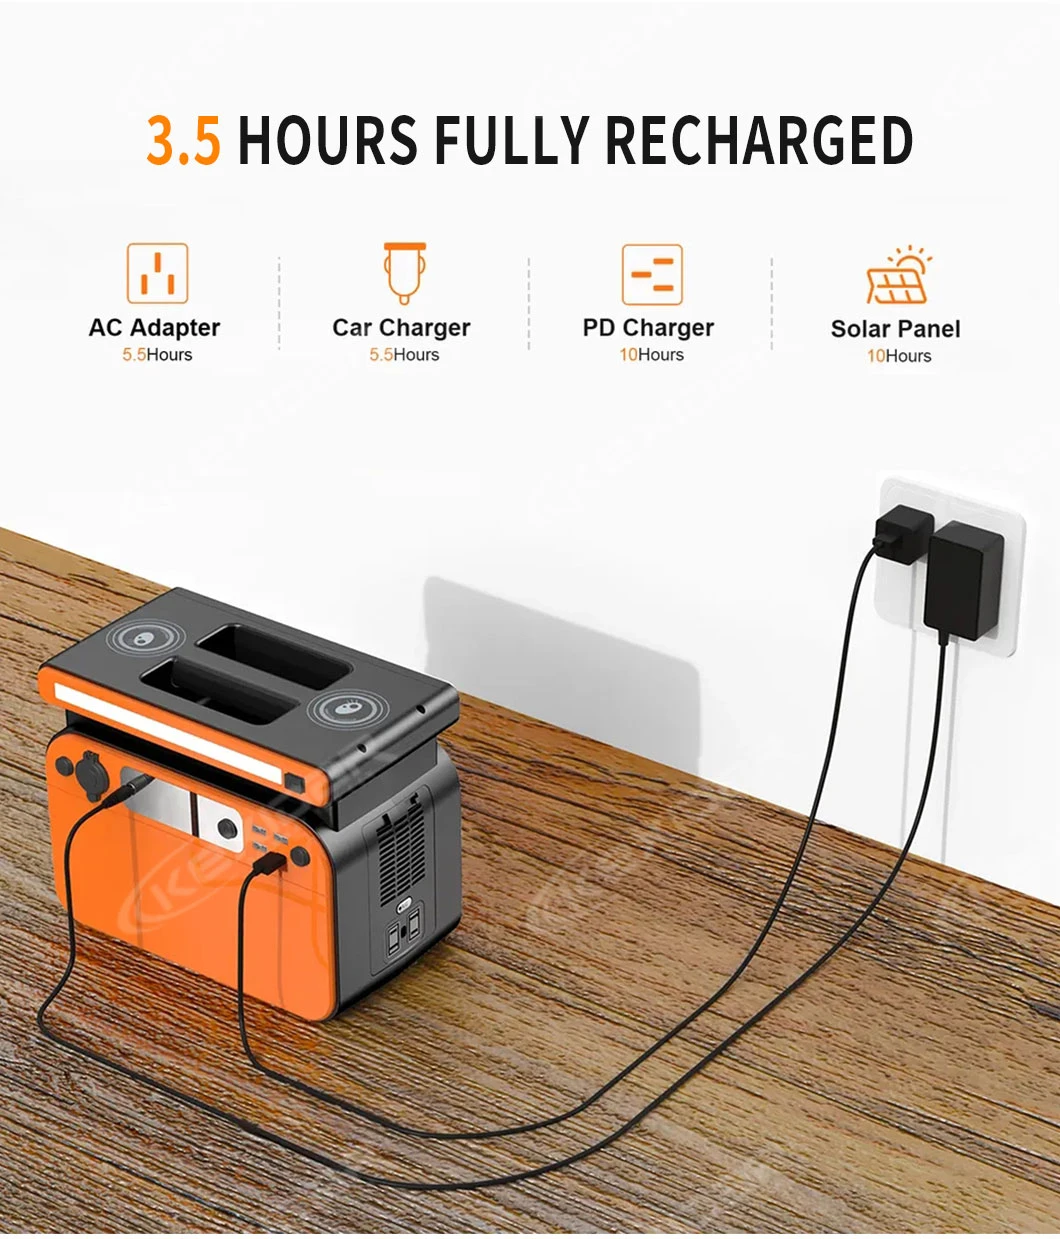 Outdoor Camping Start Portable Mobile Power Source 500W / 518wh